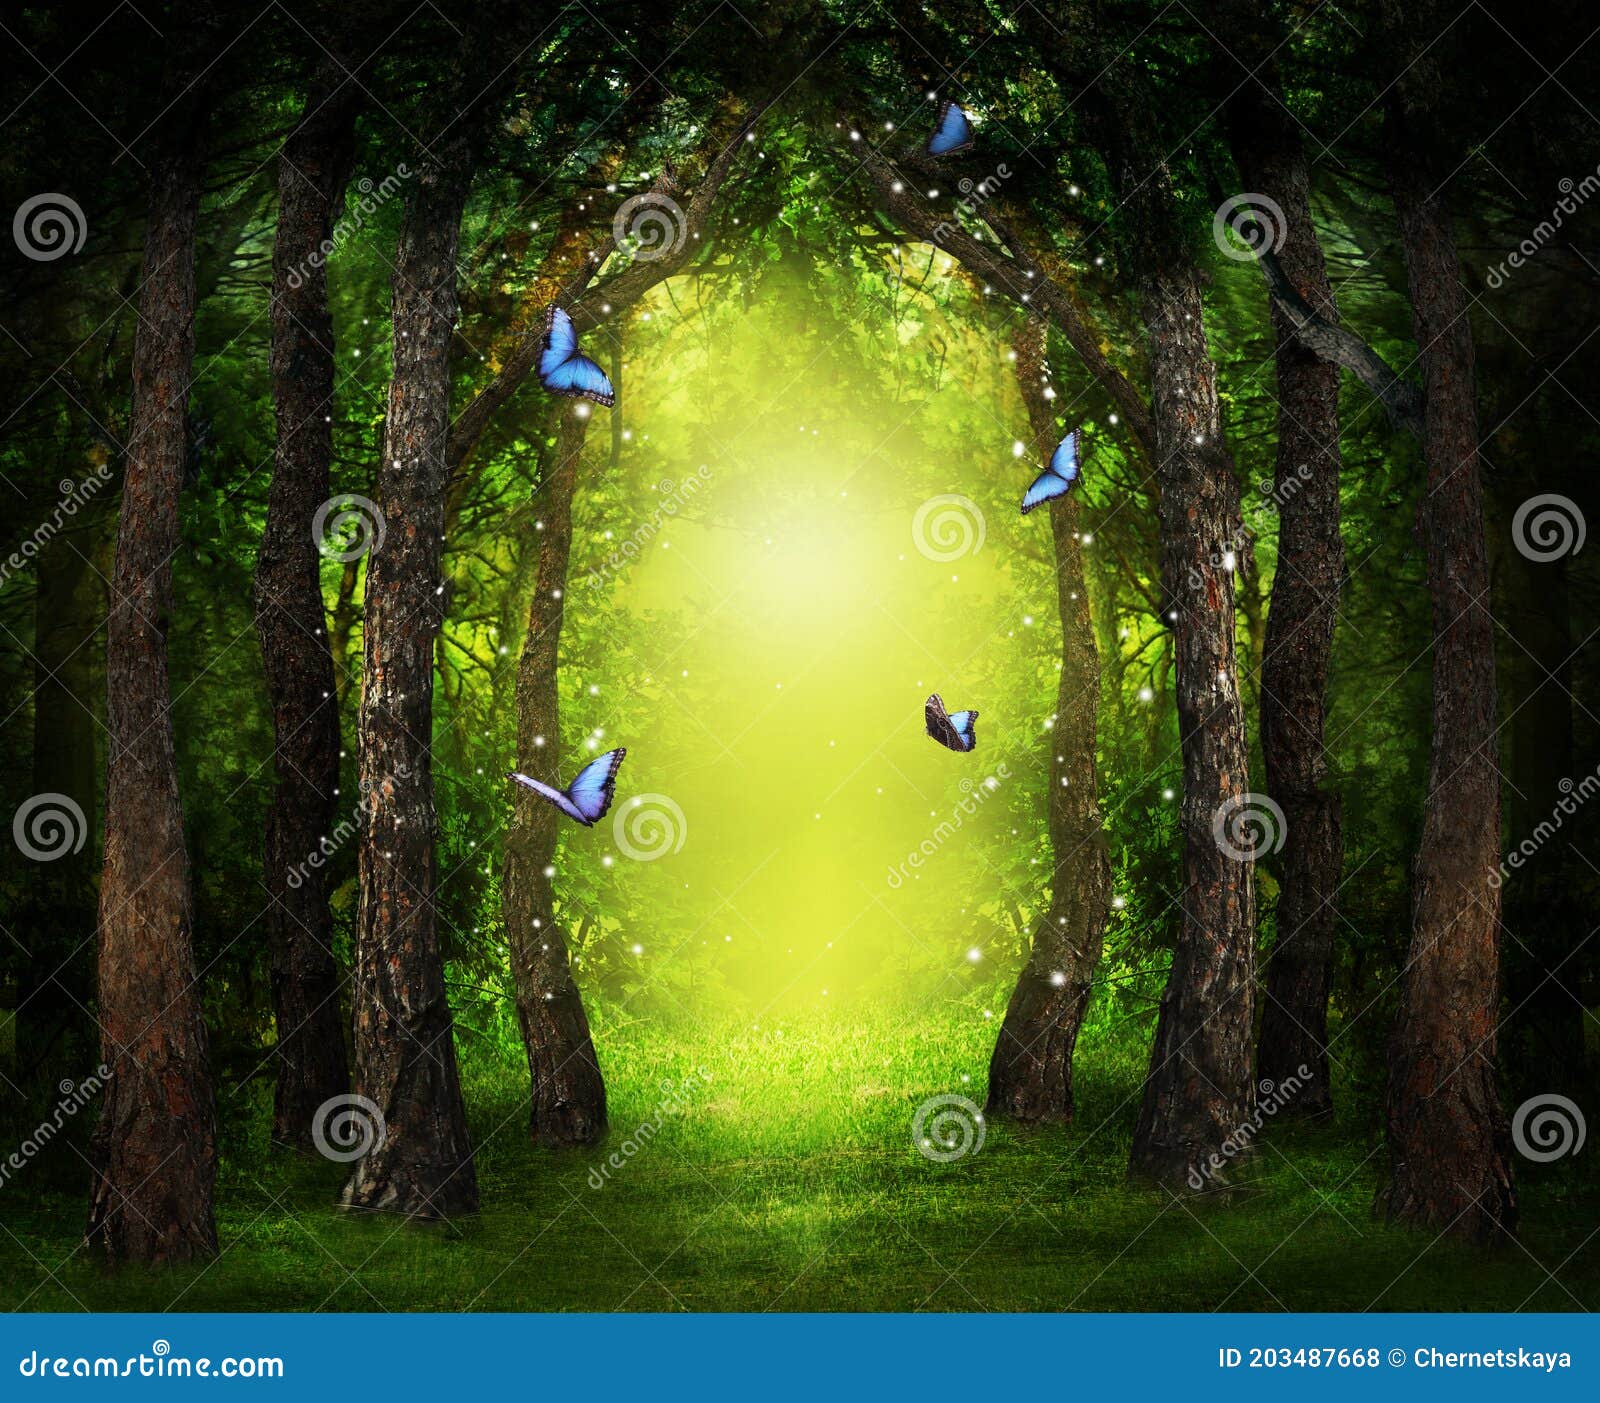 fantasy world. enchanted forest with magic lights, beautiful butterflies and way between trees